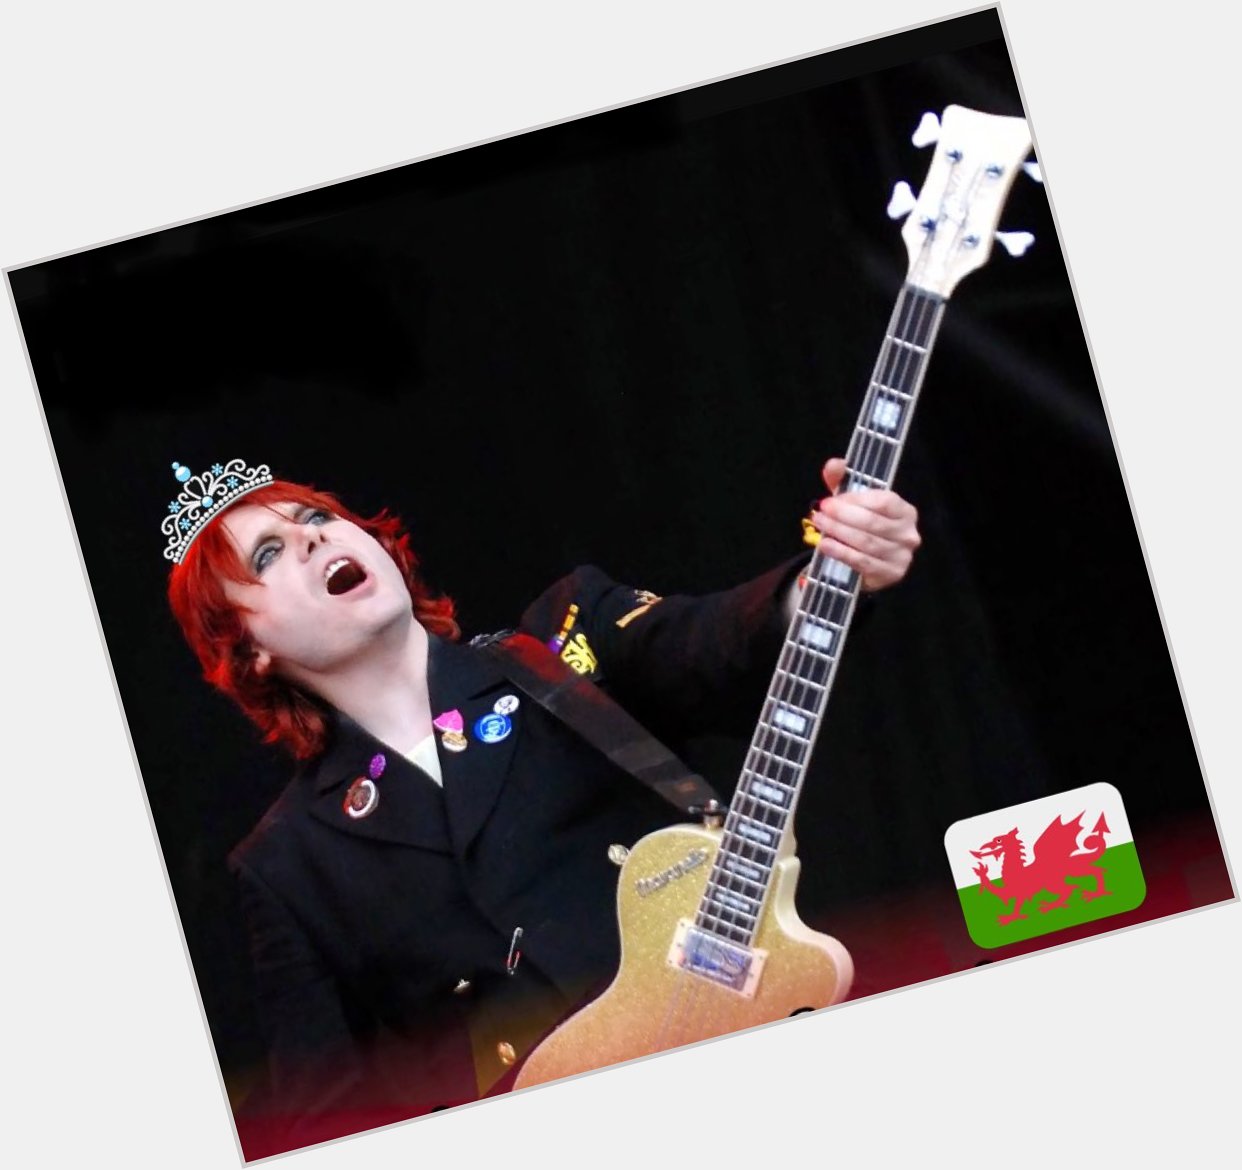 HaPpY birthday     to the man they call, Nicky Wire   